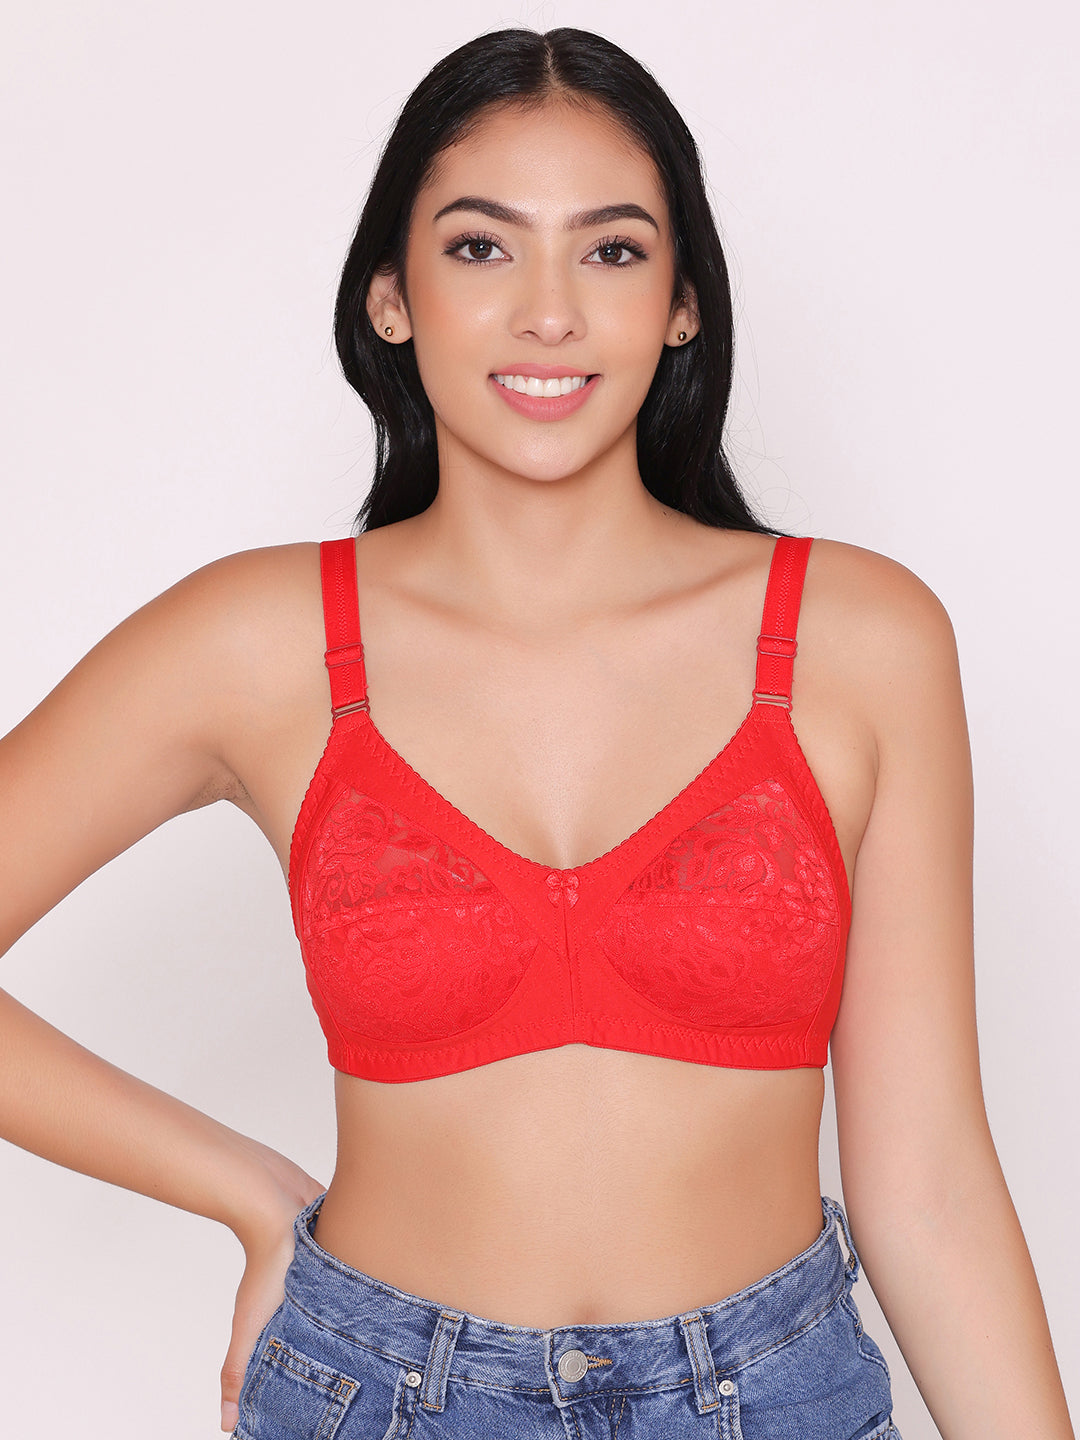 Buy INKURV Full Coverage Bra for Women with Cotton Blend Fabric for High  Support-Combo of 5, Blk,BLS,Pk,Q,W